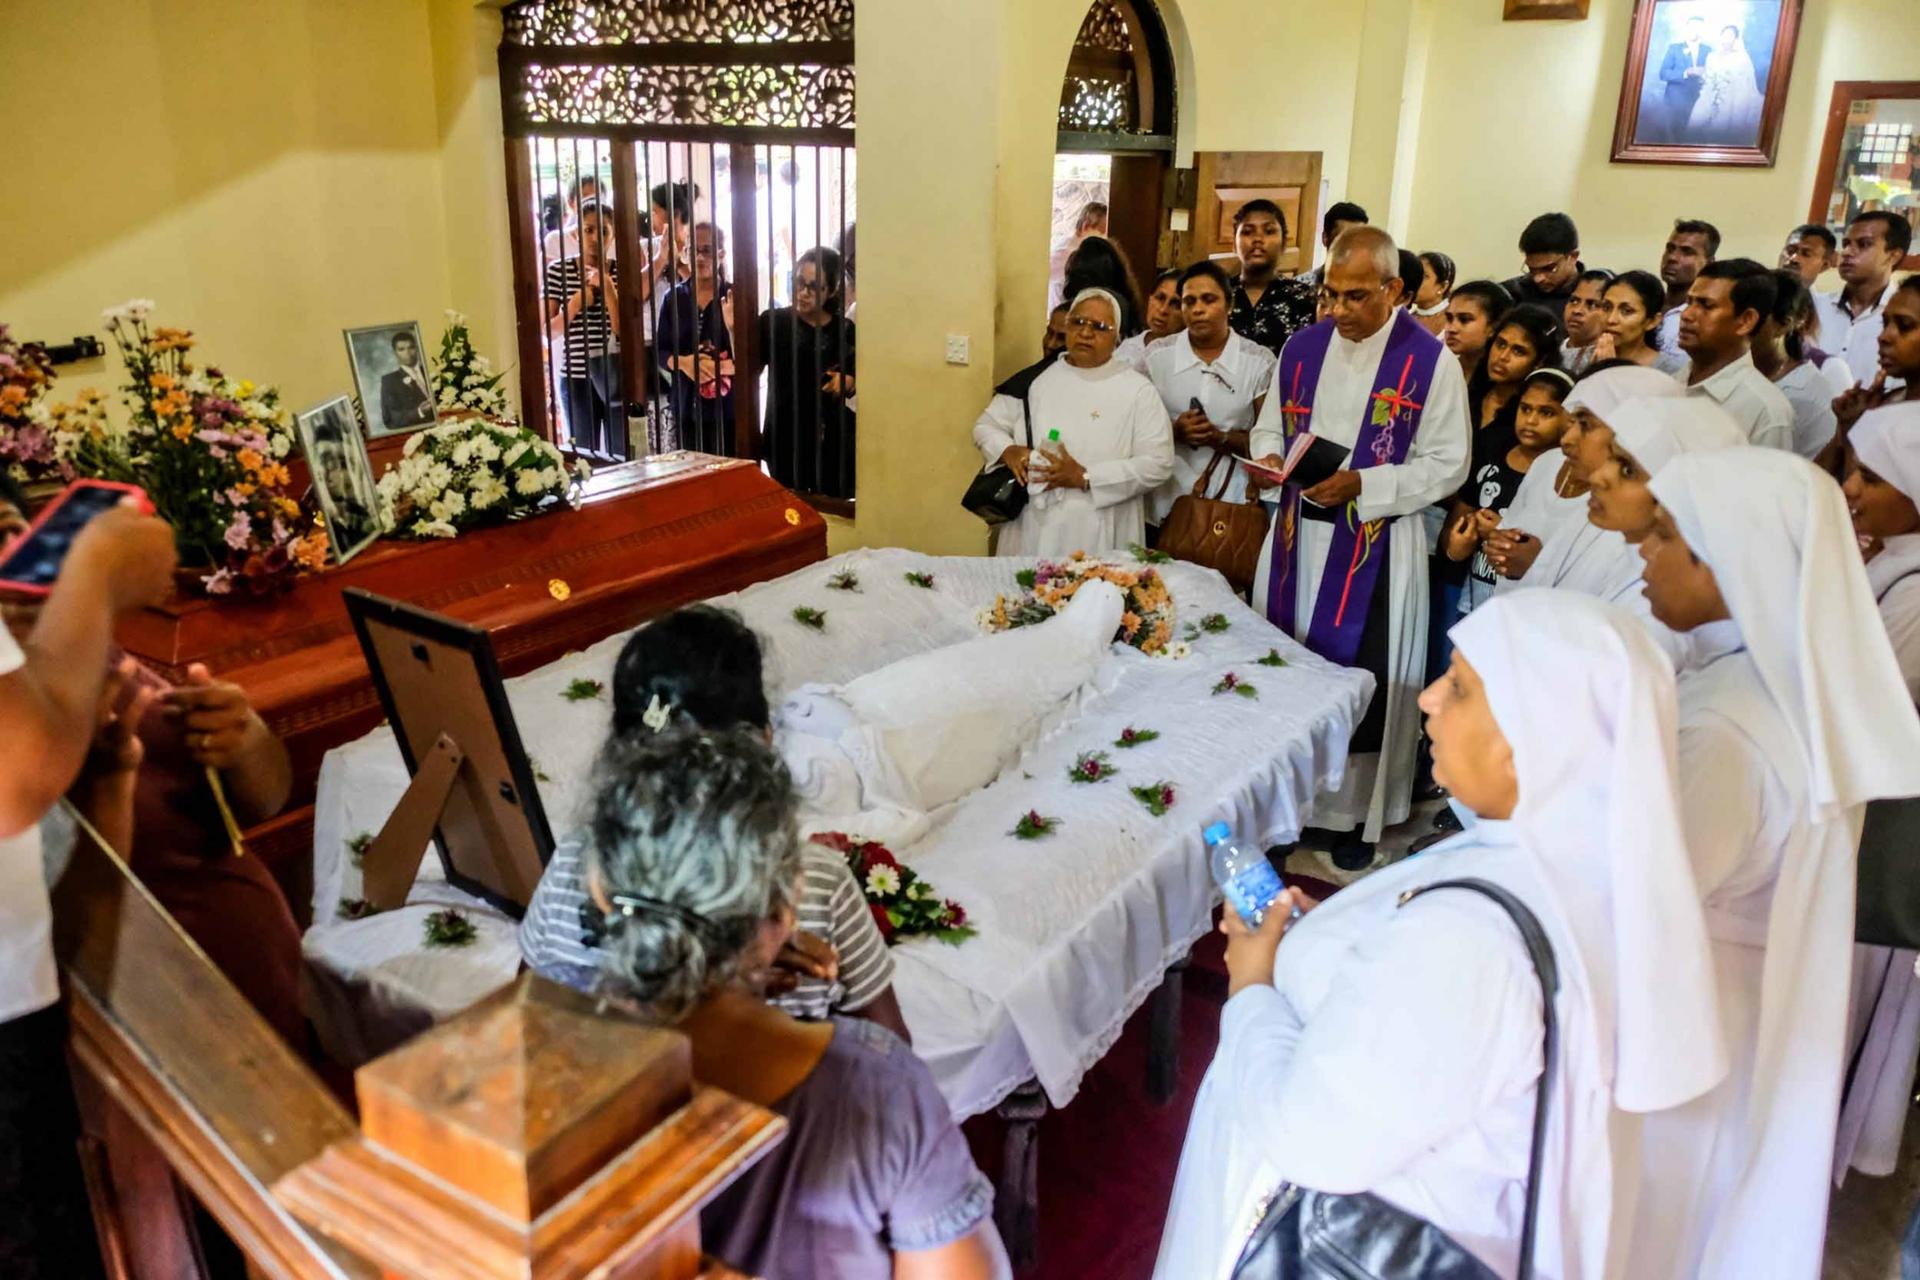 Family and friends gather around a casket in a small home while a priest reads a service